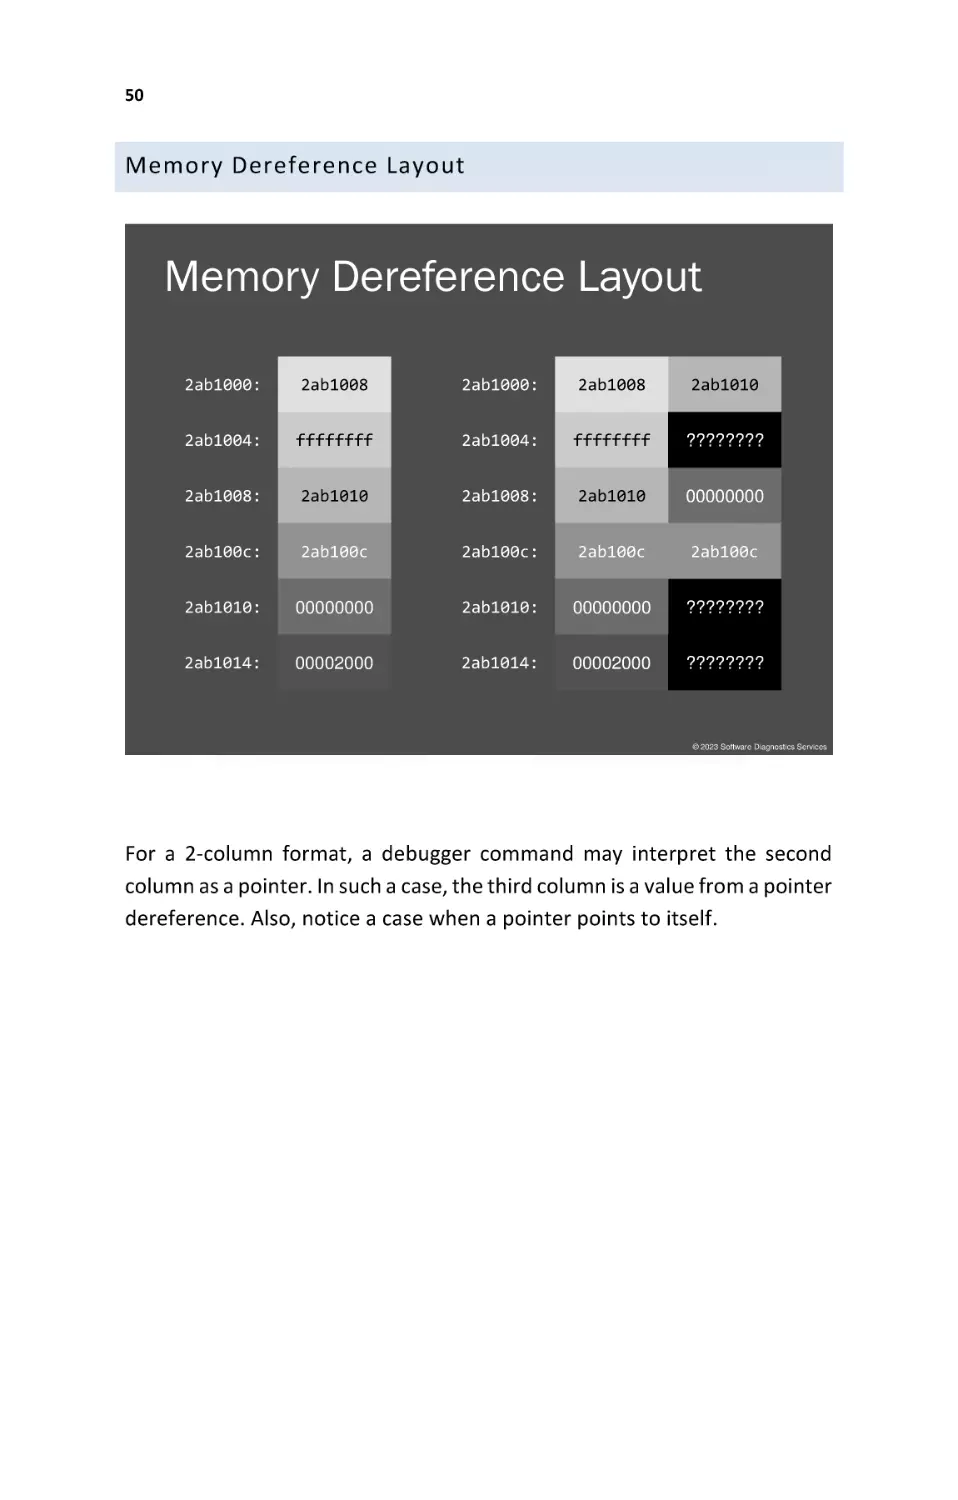 Memory Dereference Layout